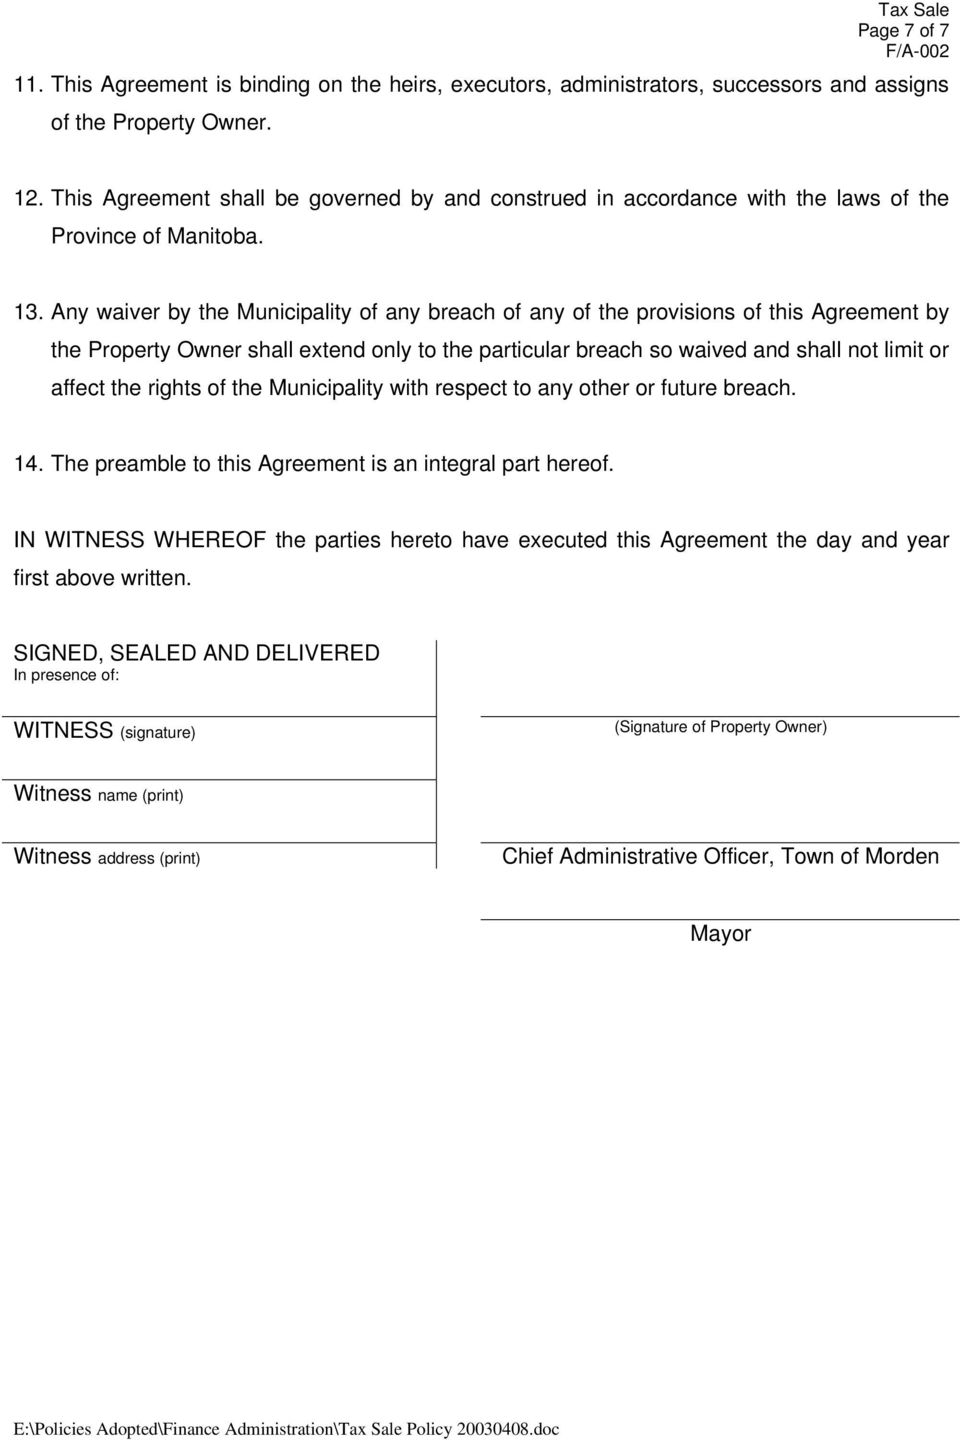 Any waiver by the Municipality of any breach of any of the provisions of this Agreement by the Property Owner shall extend only to the particular breach so waived and shall not limit or affect the